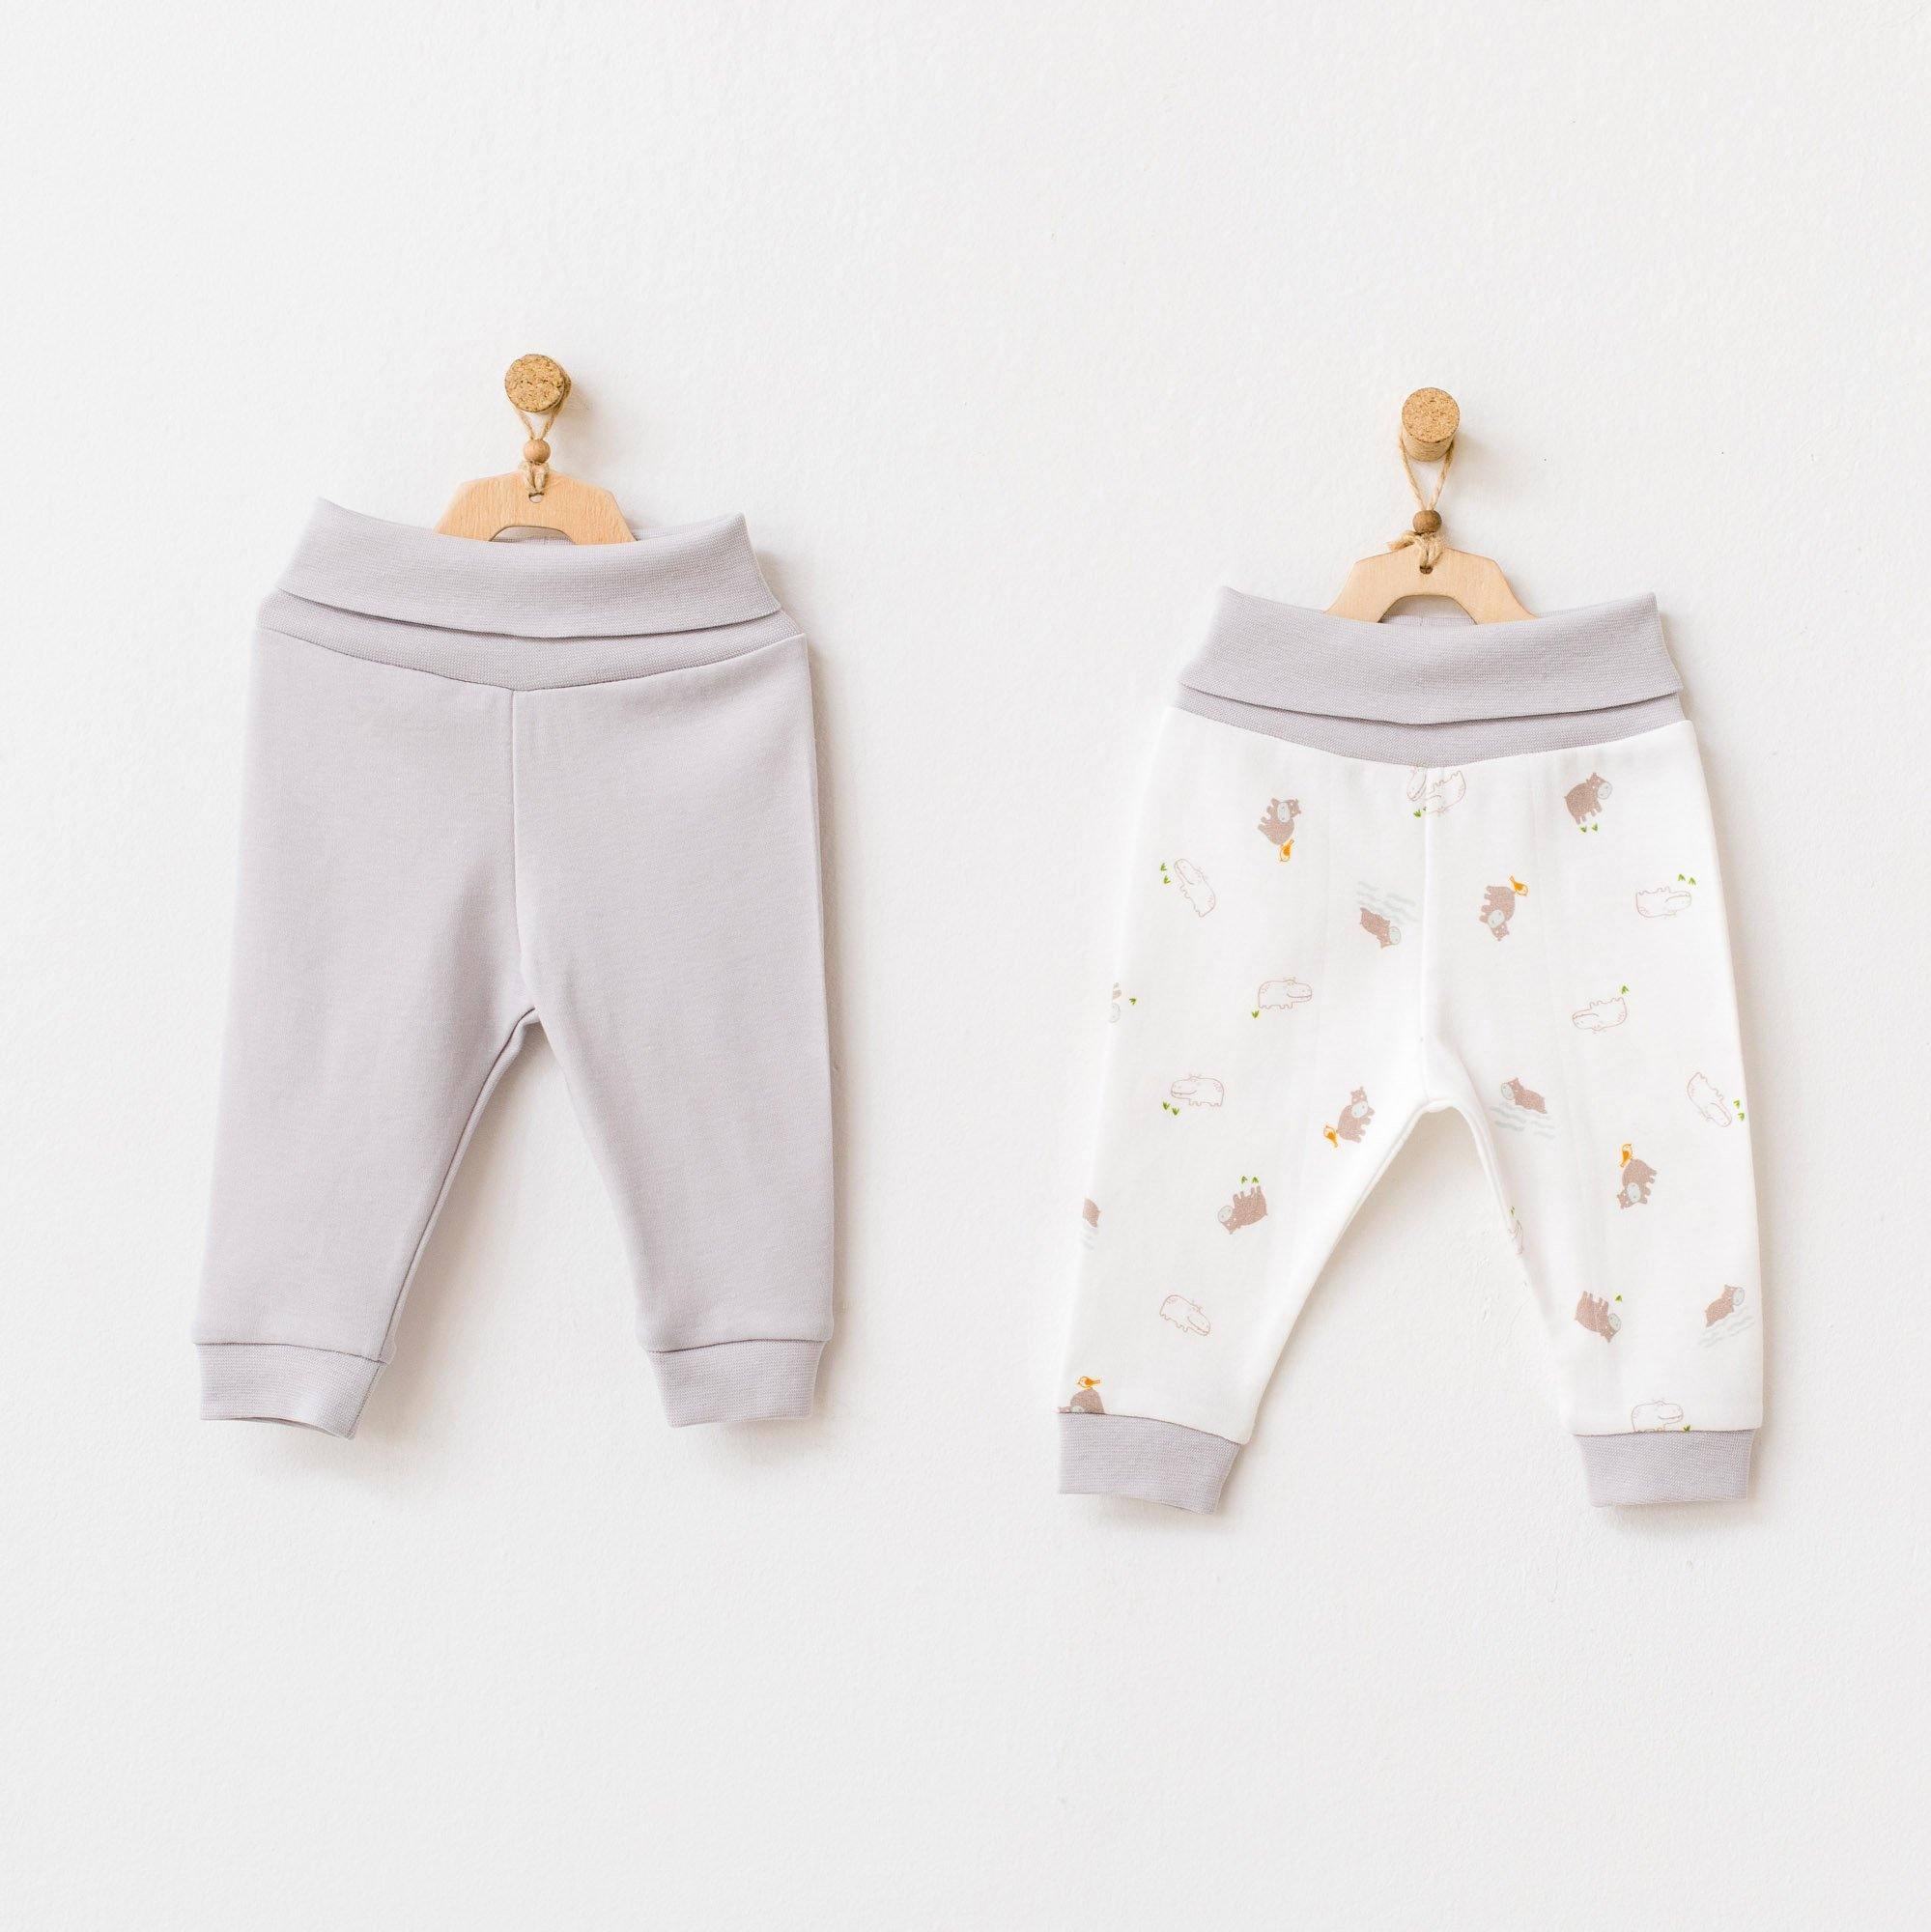 Hippo - 2 Pieces Baby Pant Set - Hippo - 2 Pieces Baby Pant Set - 1-3 Months - Andywawa - Melymod